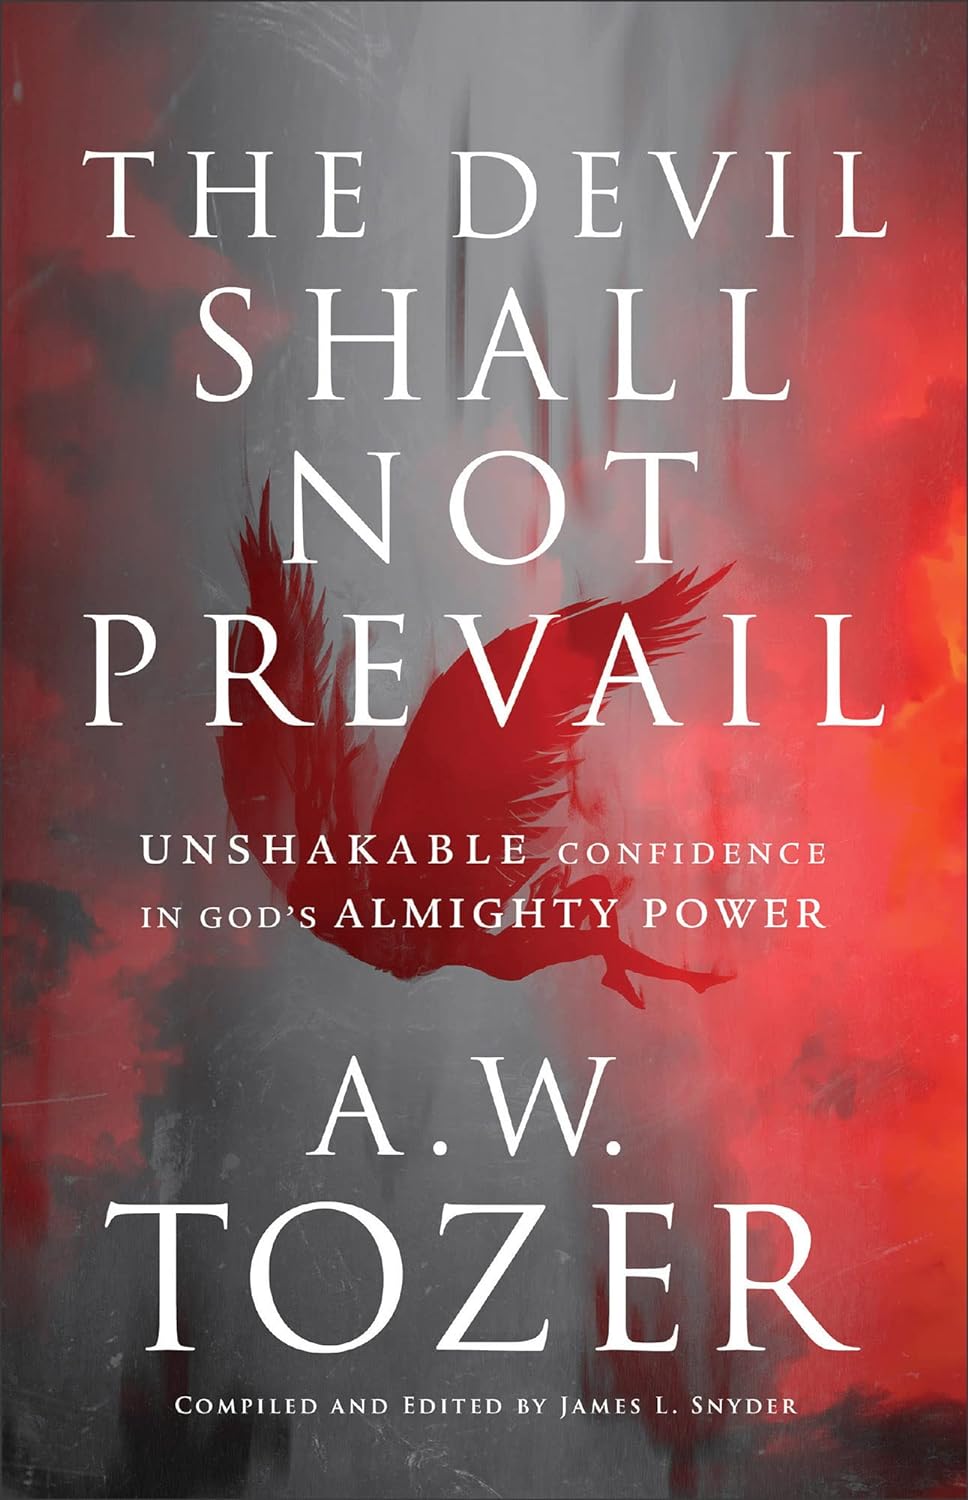 Devil Shall Not Prevail: Unshakable Confidence in God’s Almighty Power